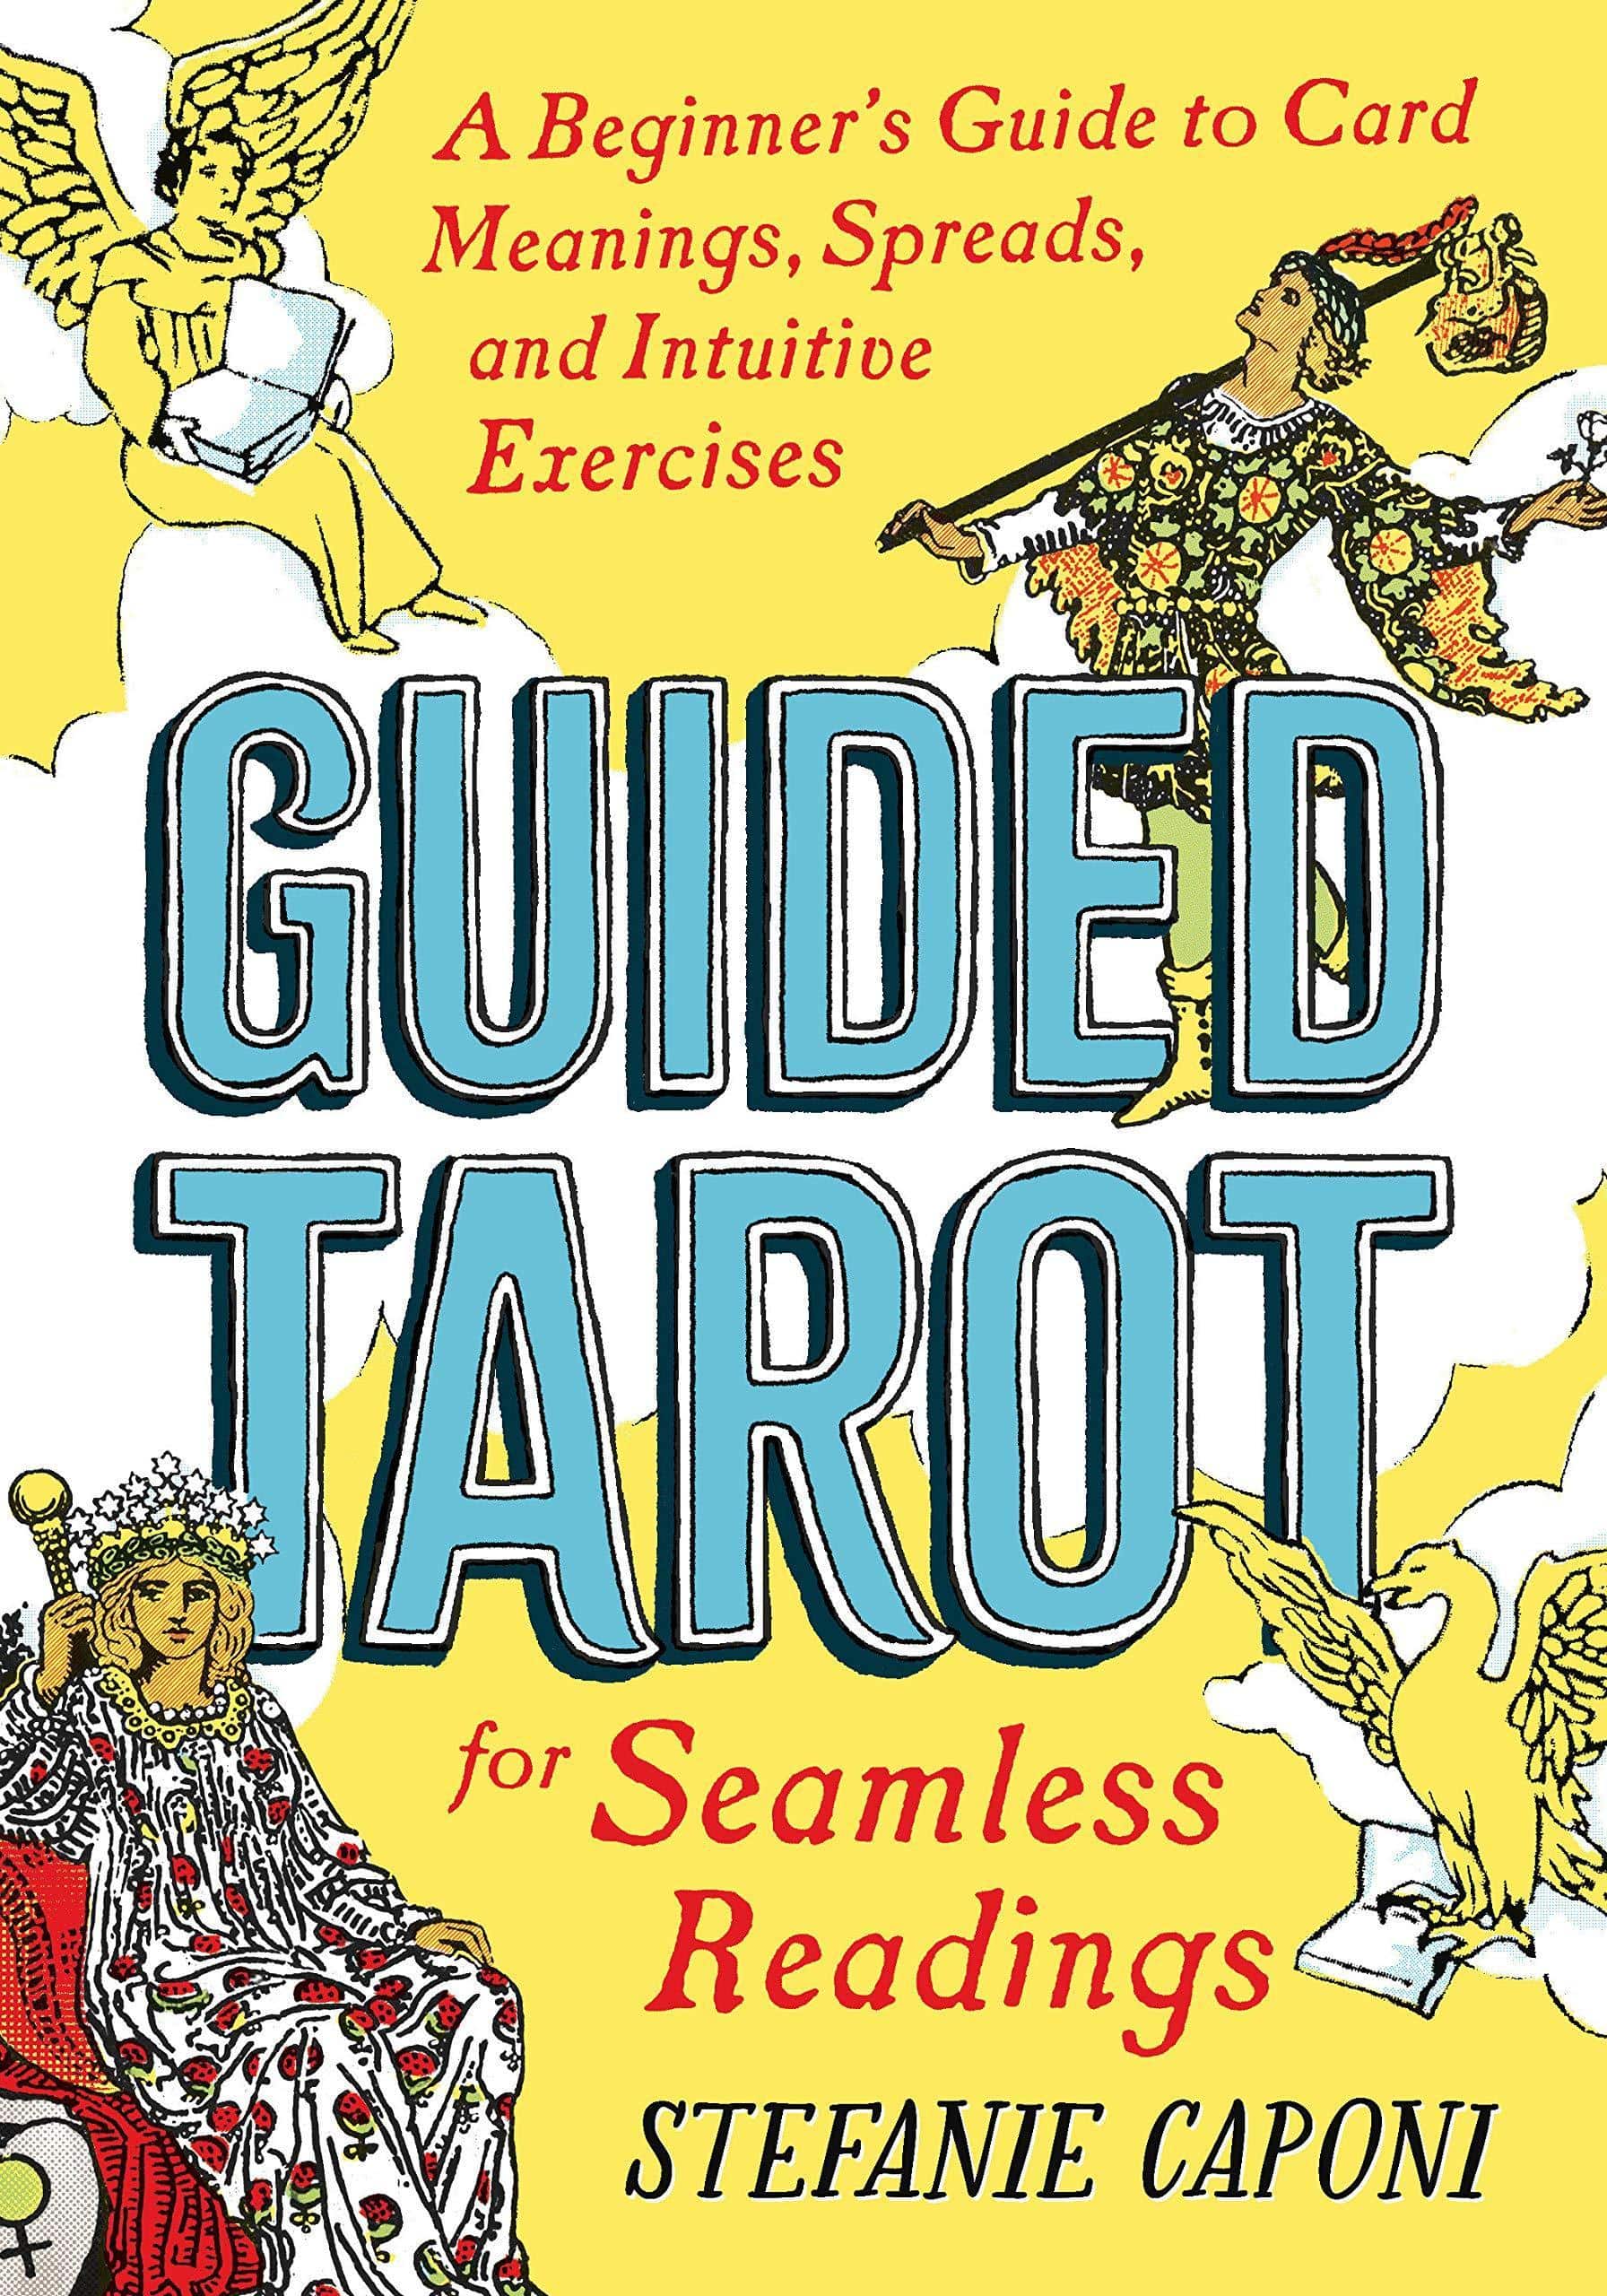 Guided Tarot: A Beginner's Guide to Card Meanings, Spreads, and Intuitive Exercises for Seamless Readings - SureShot Books Publishing LLC